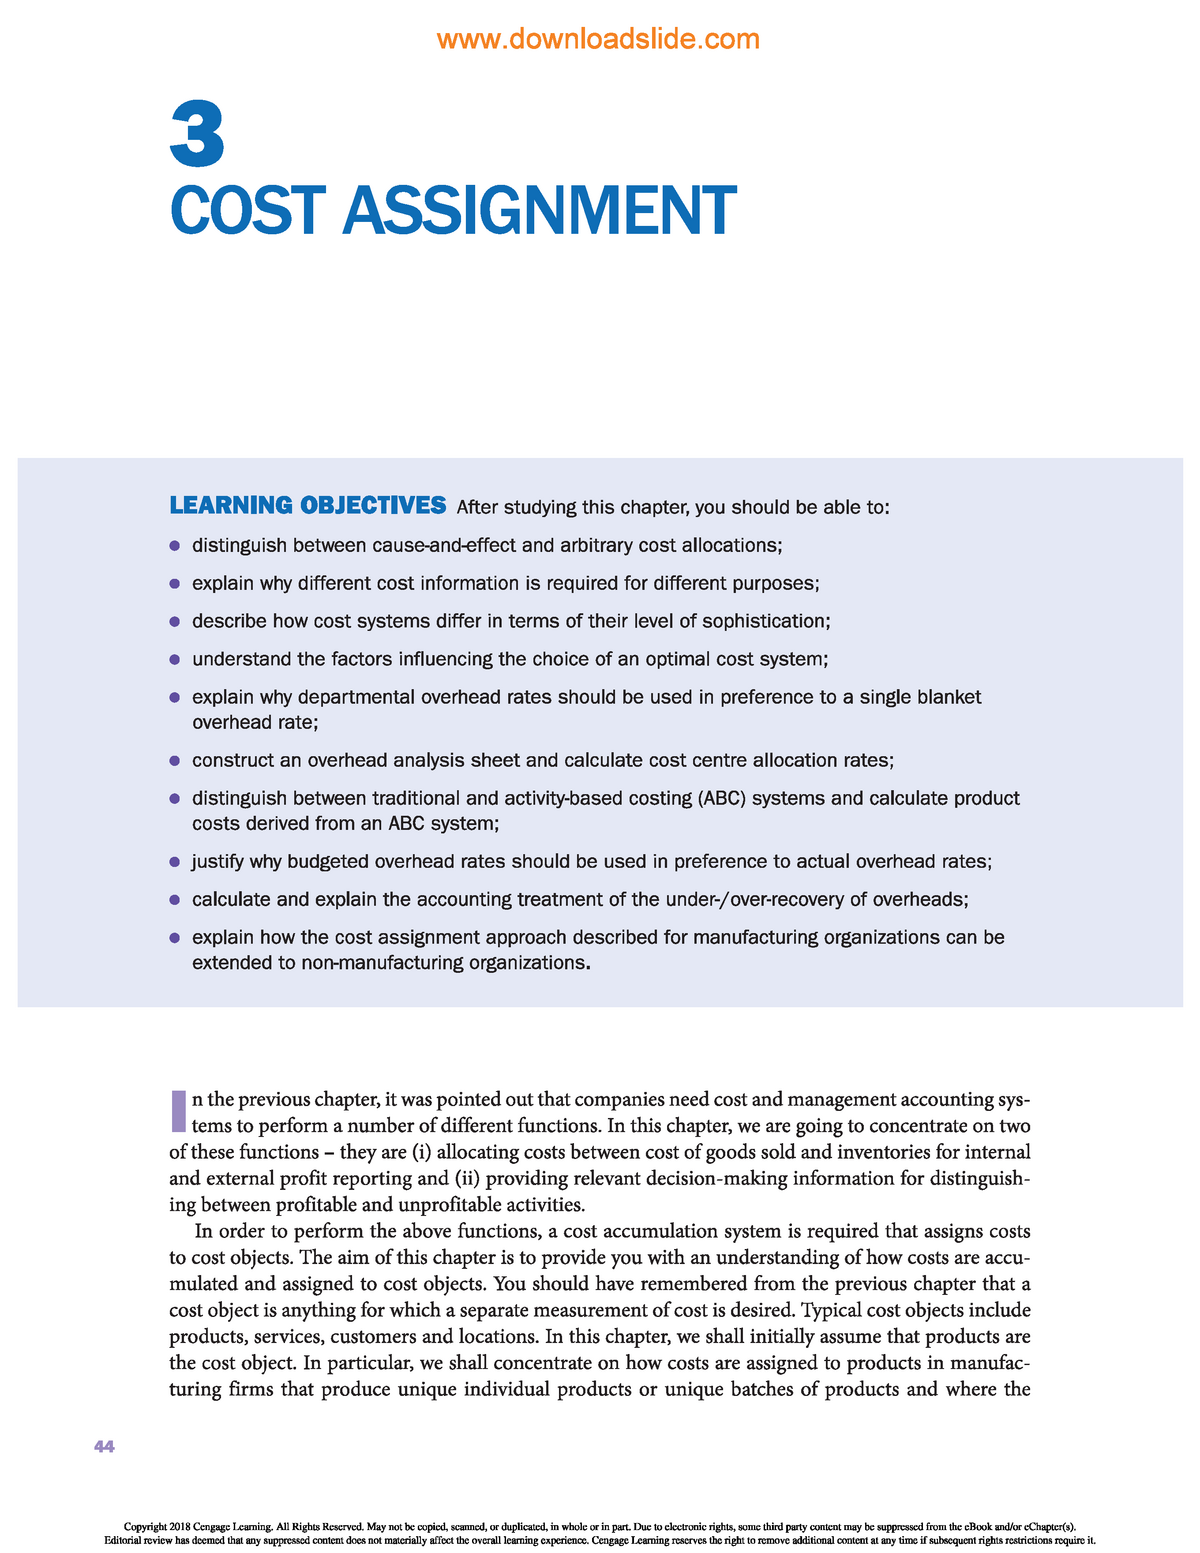 cost assignment are